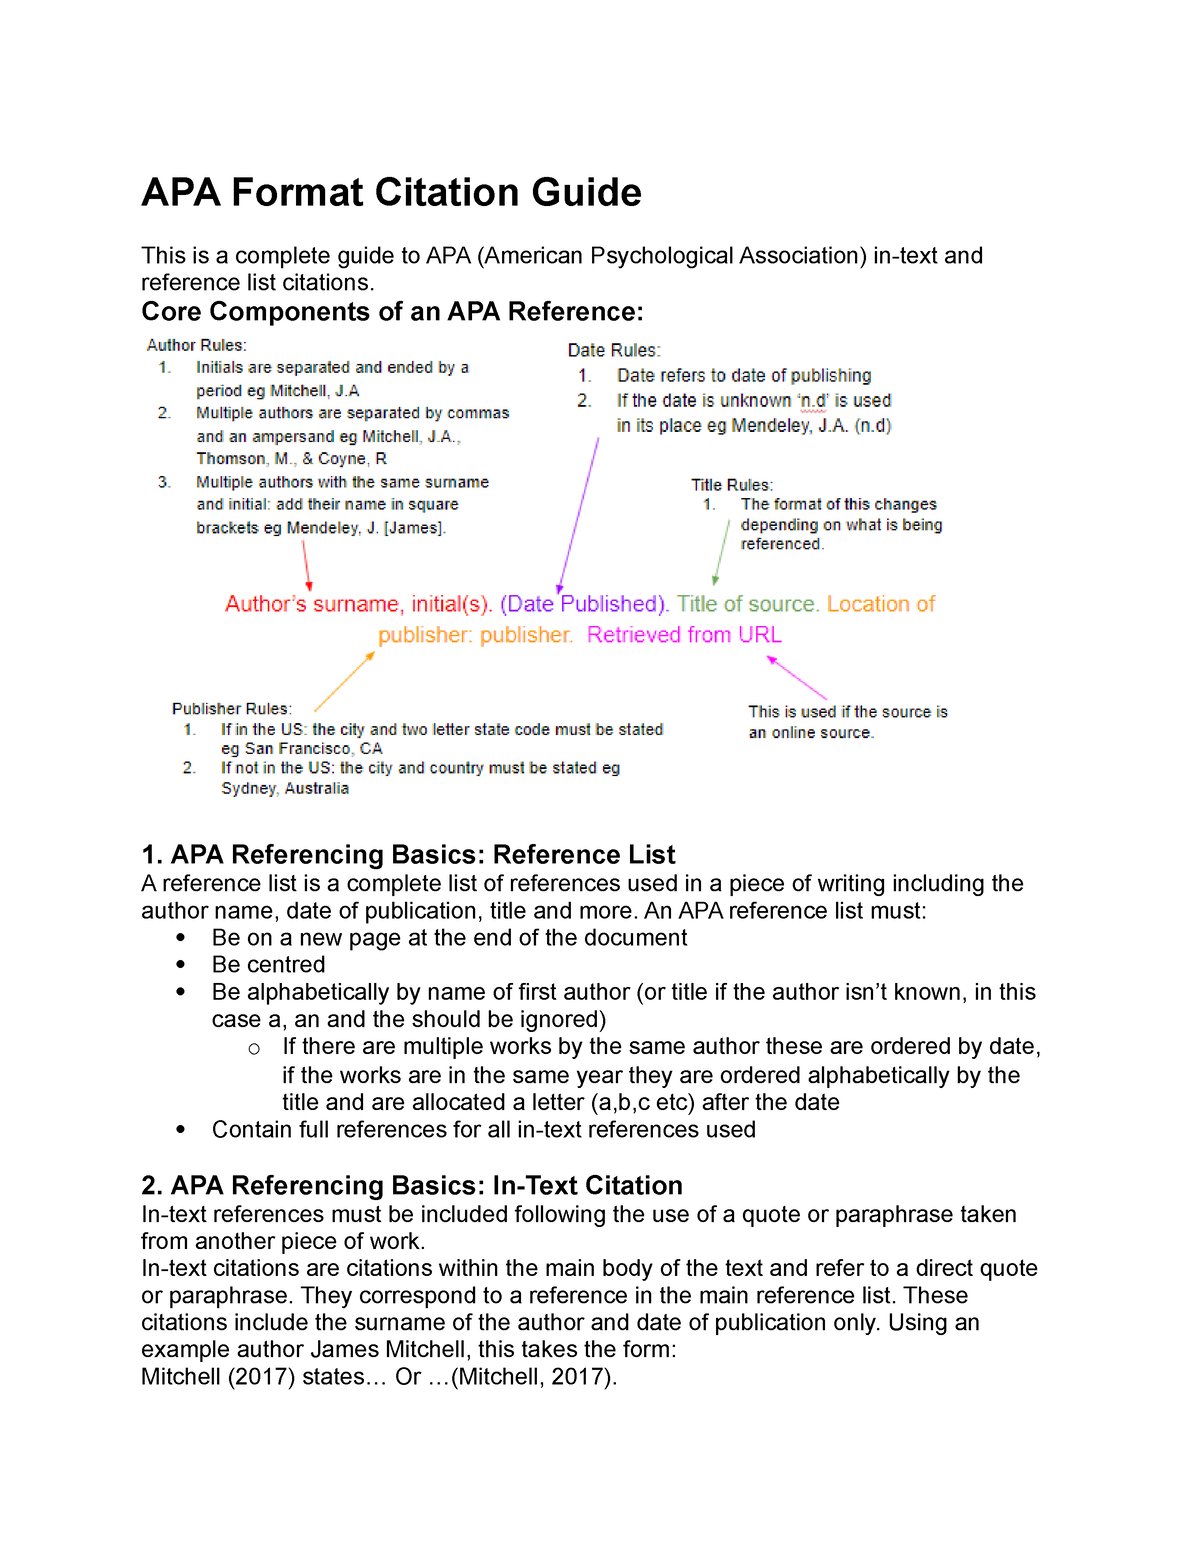 APA Format Citation Guide - Core Components of an APA Reference: 1. APA ...